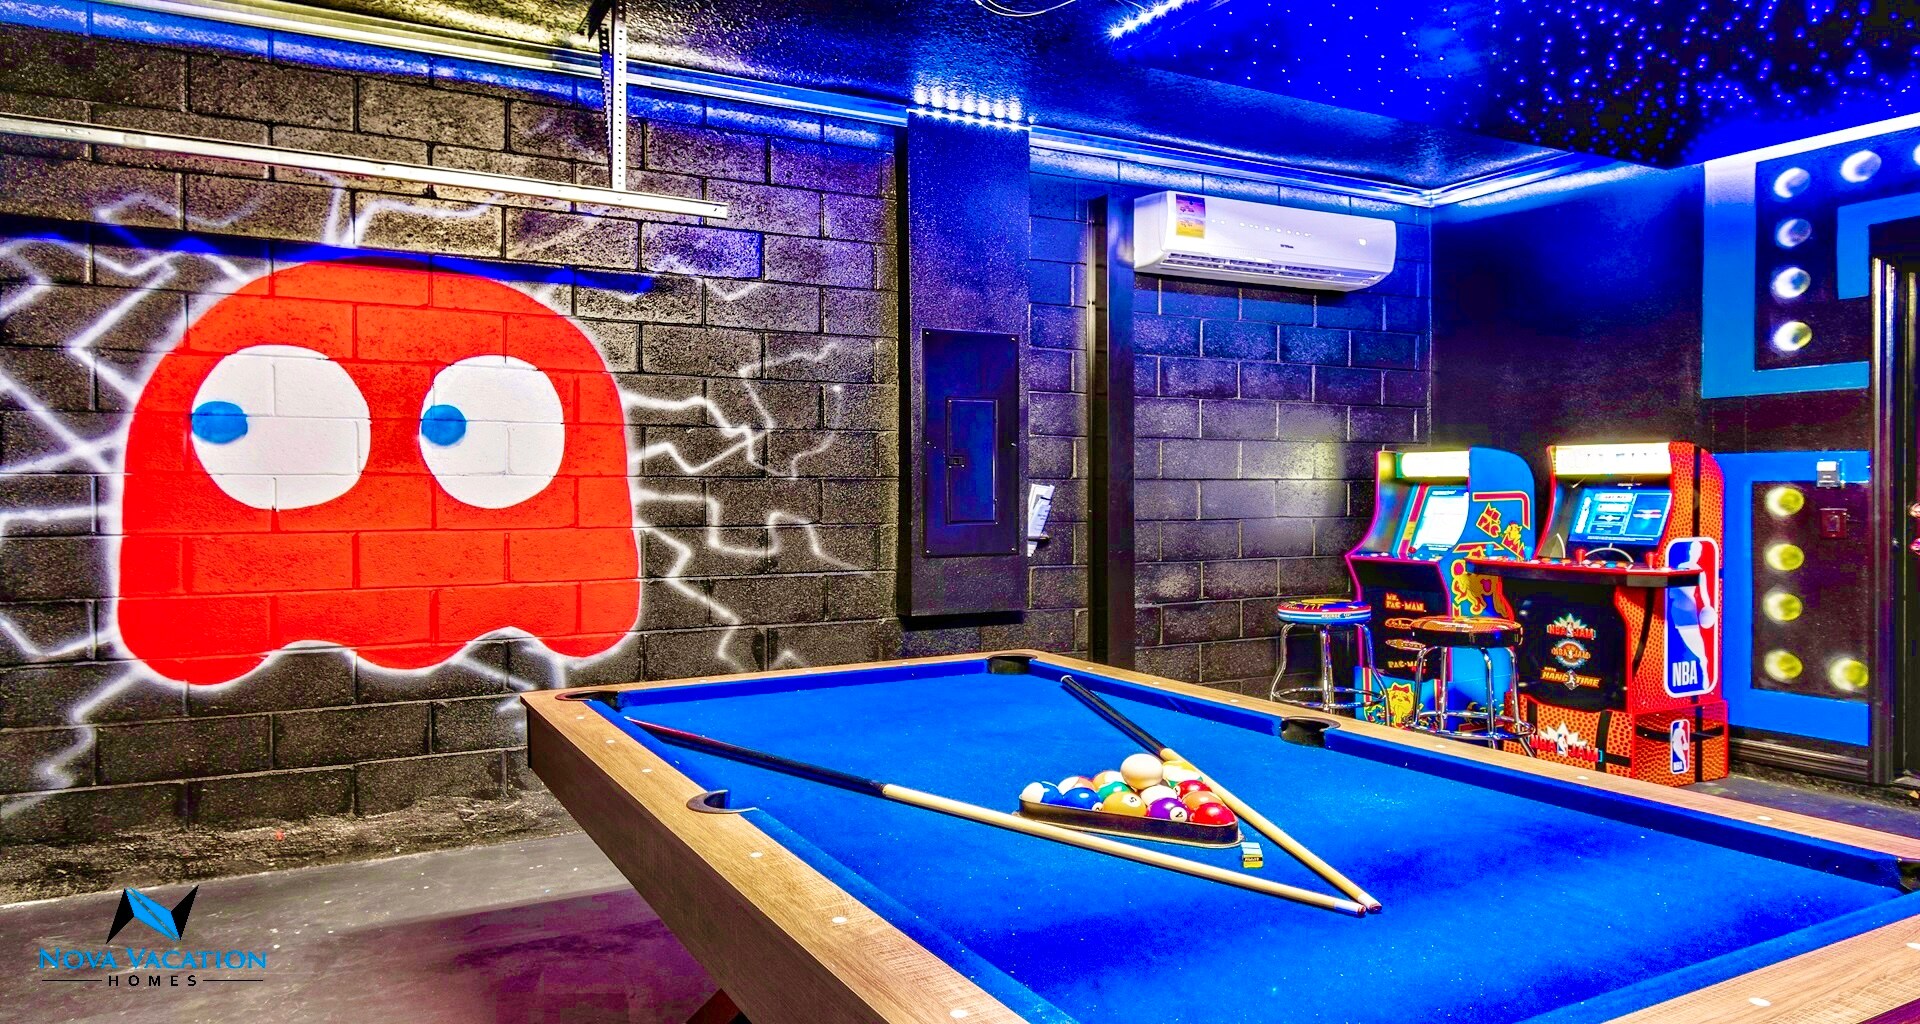 Game room includes pool table and fun game machines.